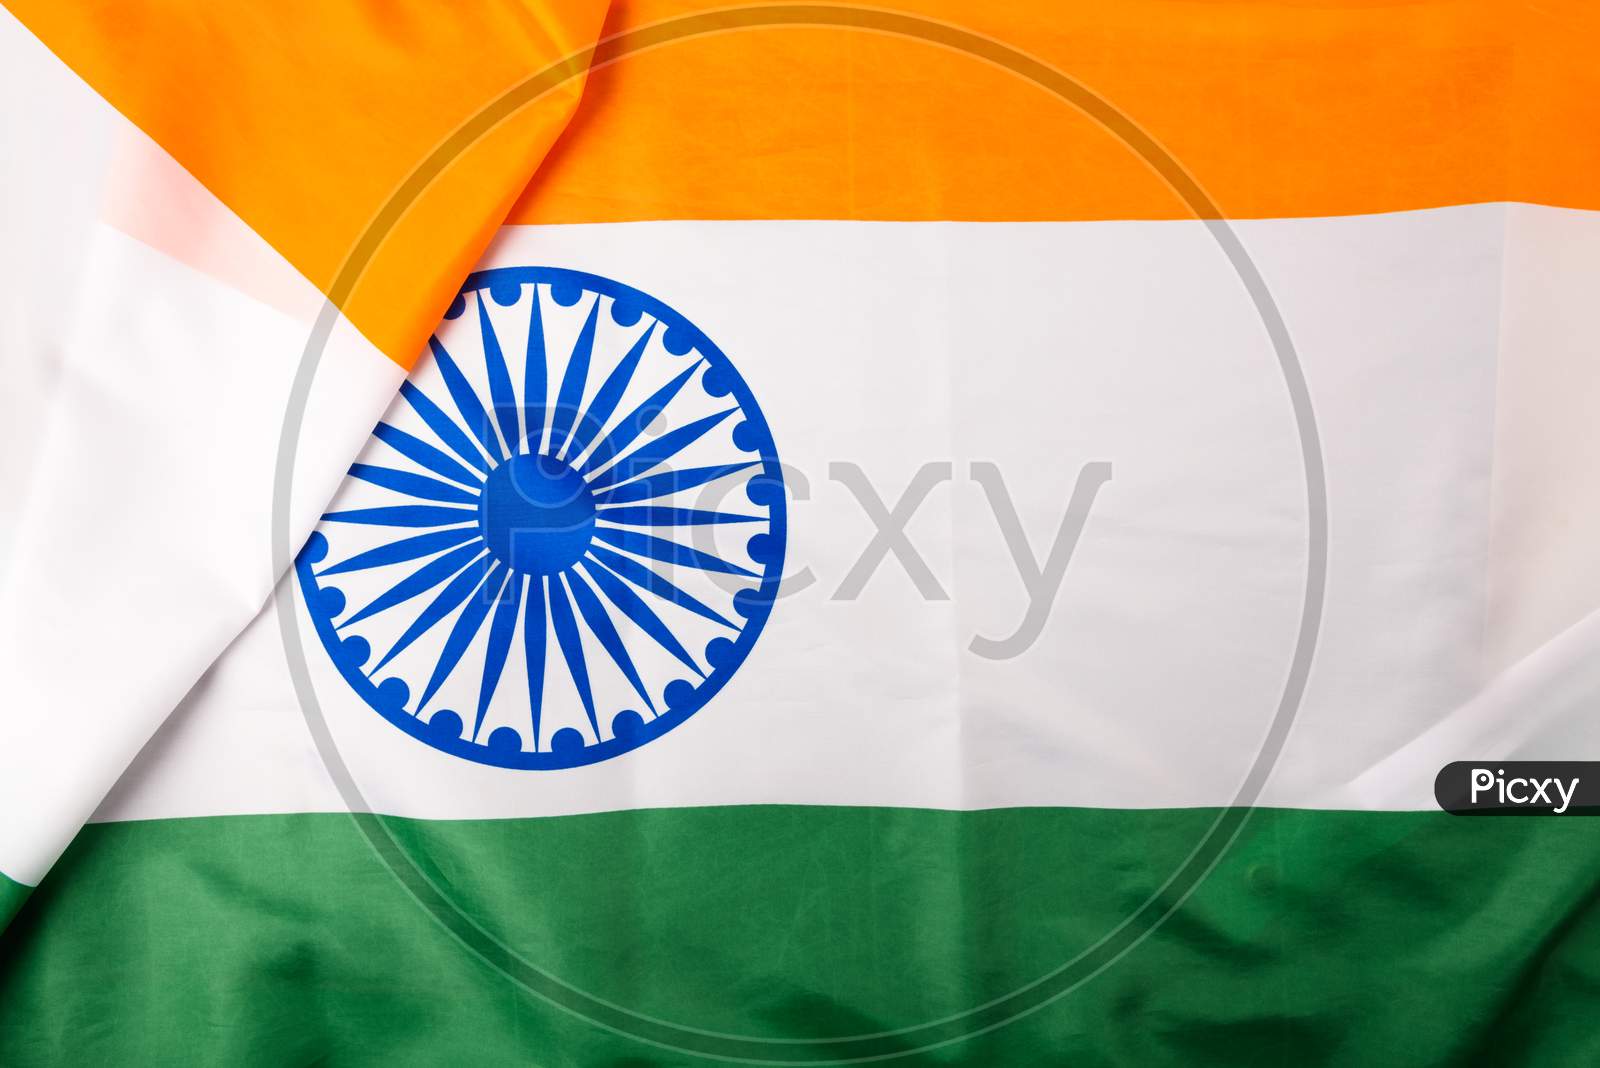 Indian Republic Day, Flat Lay Top View, Indian Flag Background